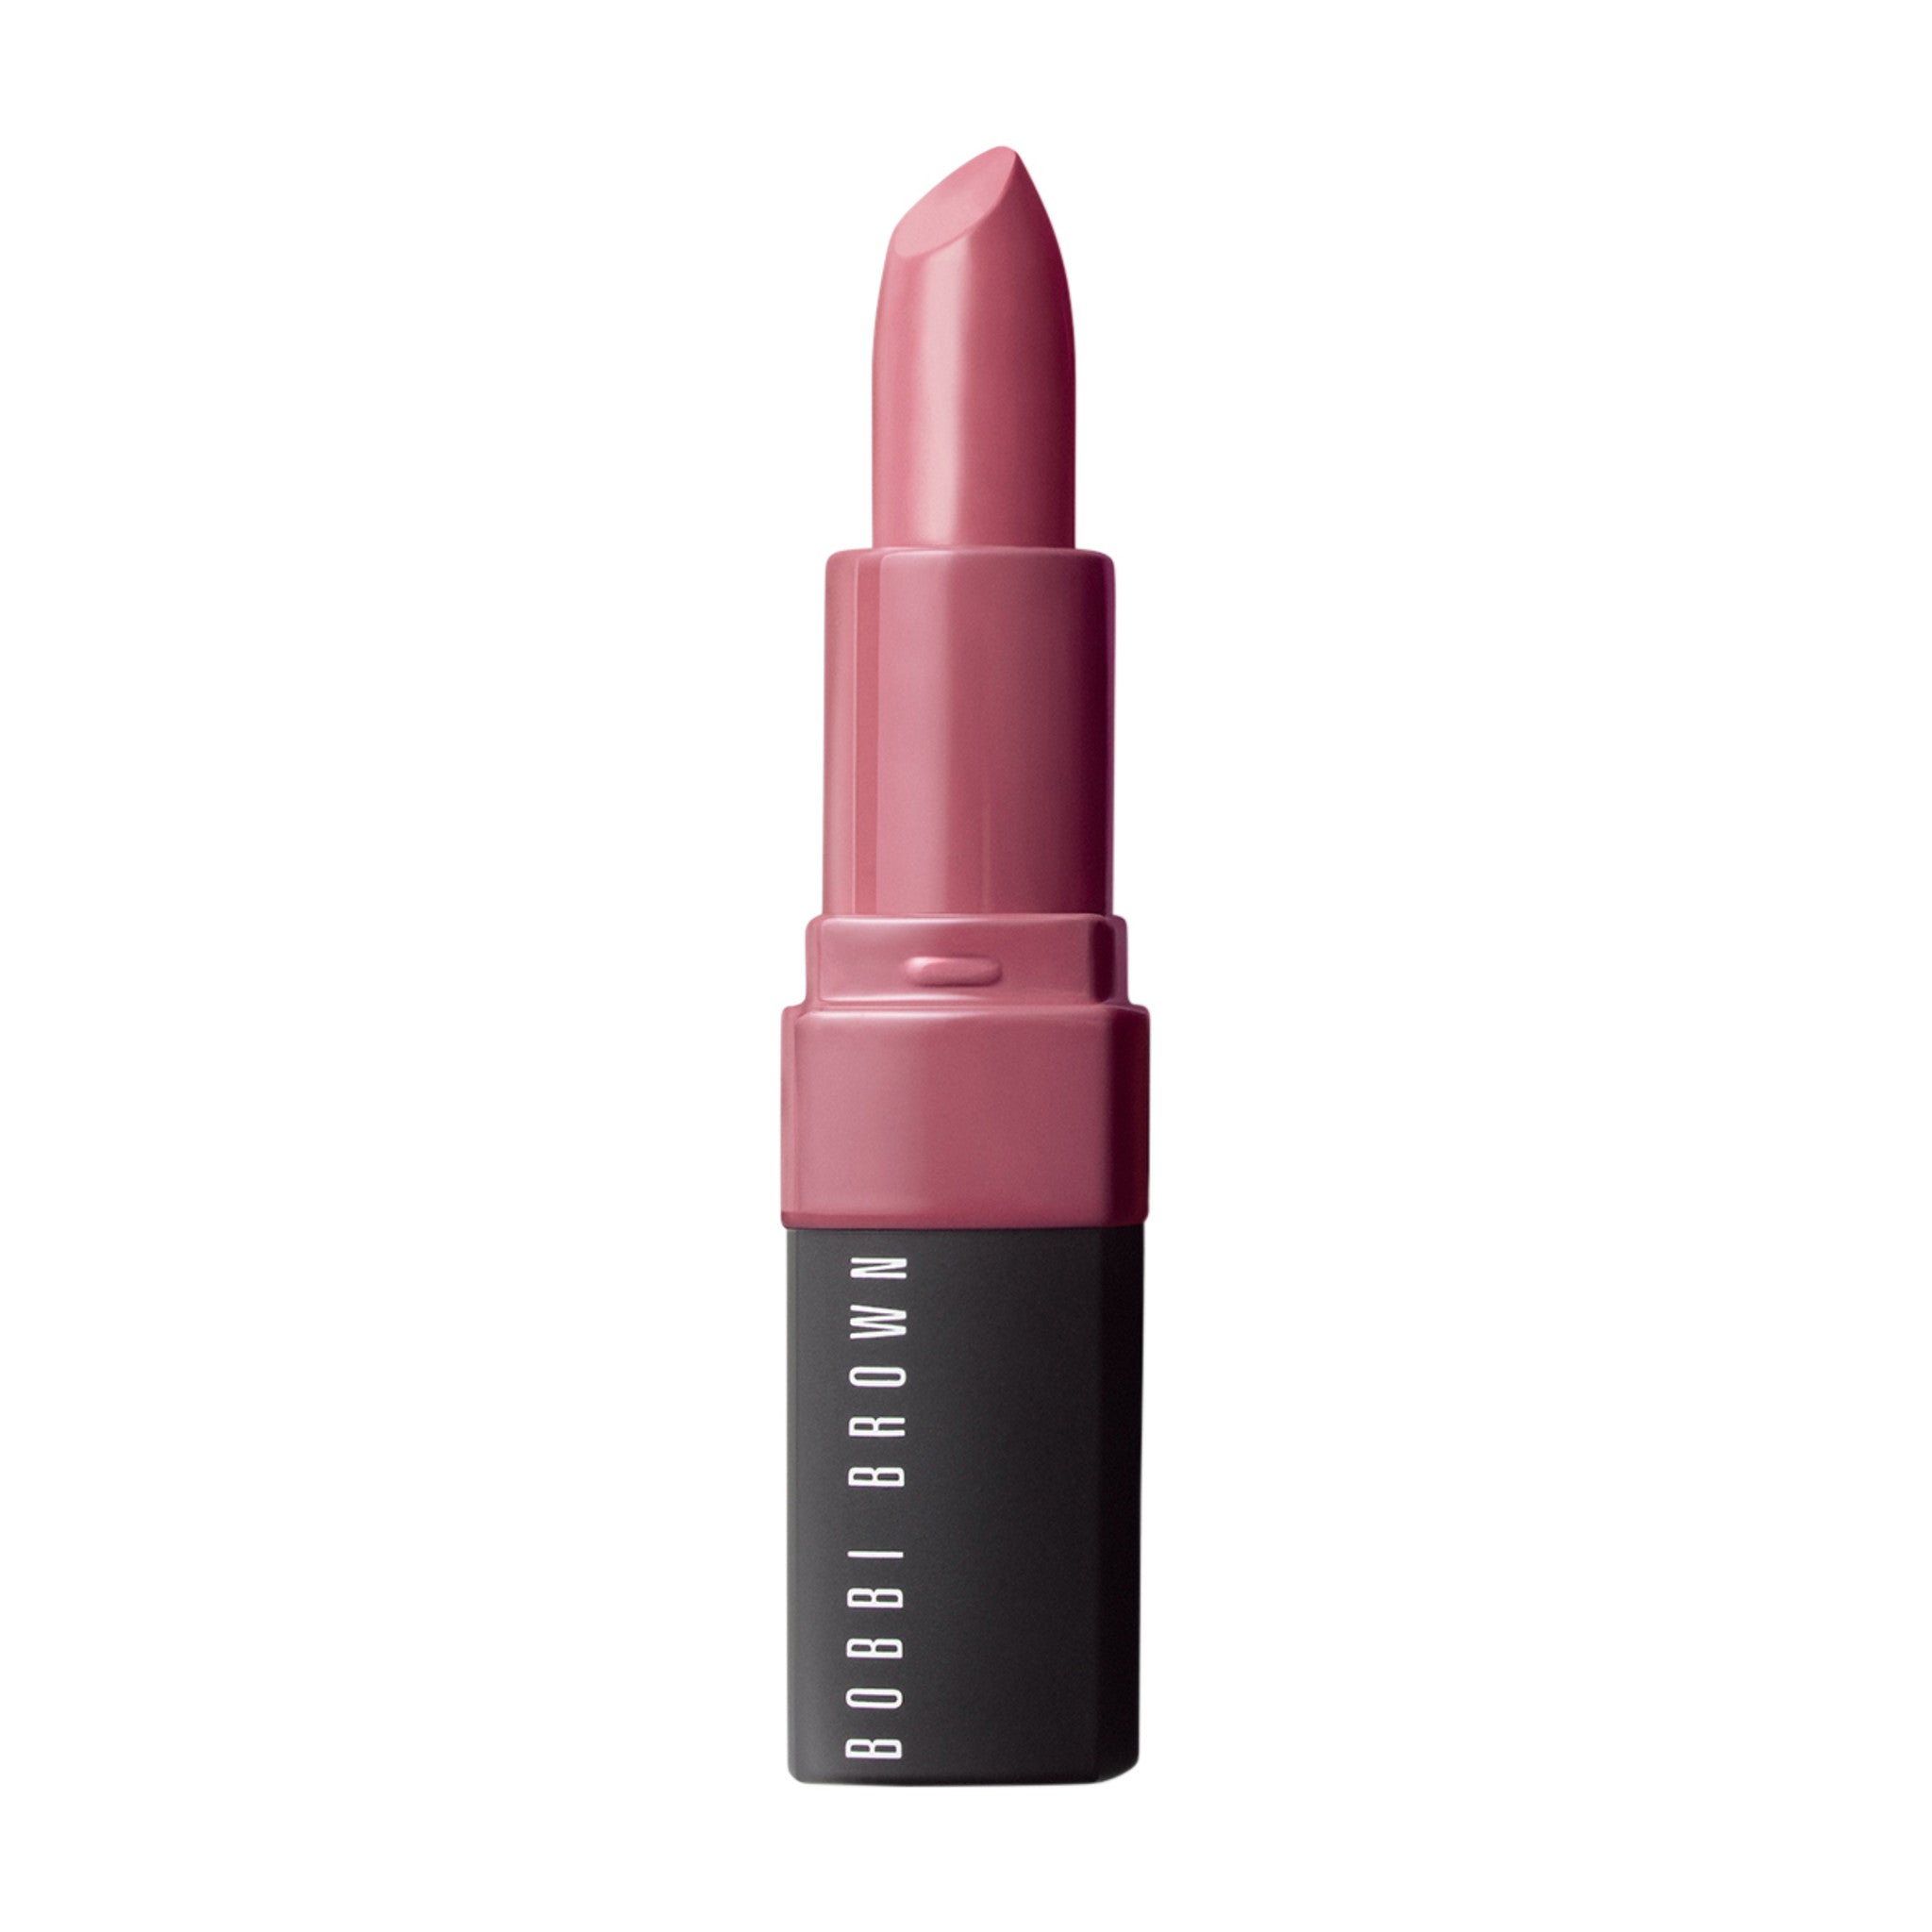 Bobbi Brown Crushed Lip Color Color/Shade variant: Lilac main image. This product is in the color pink